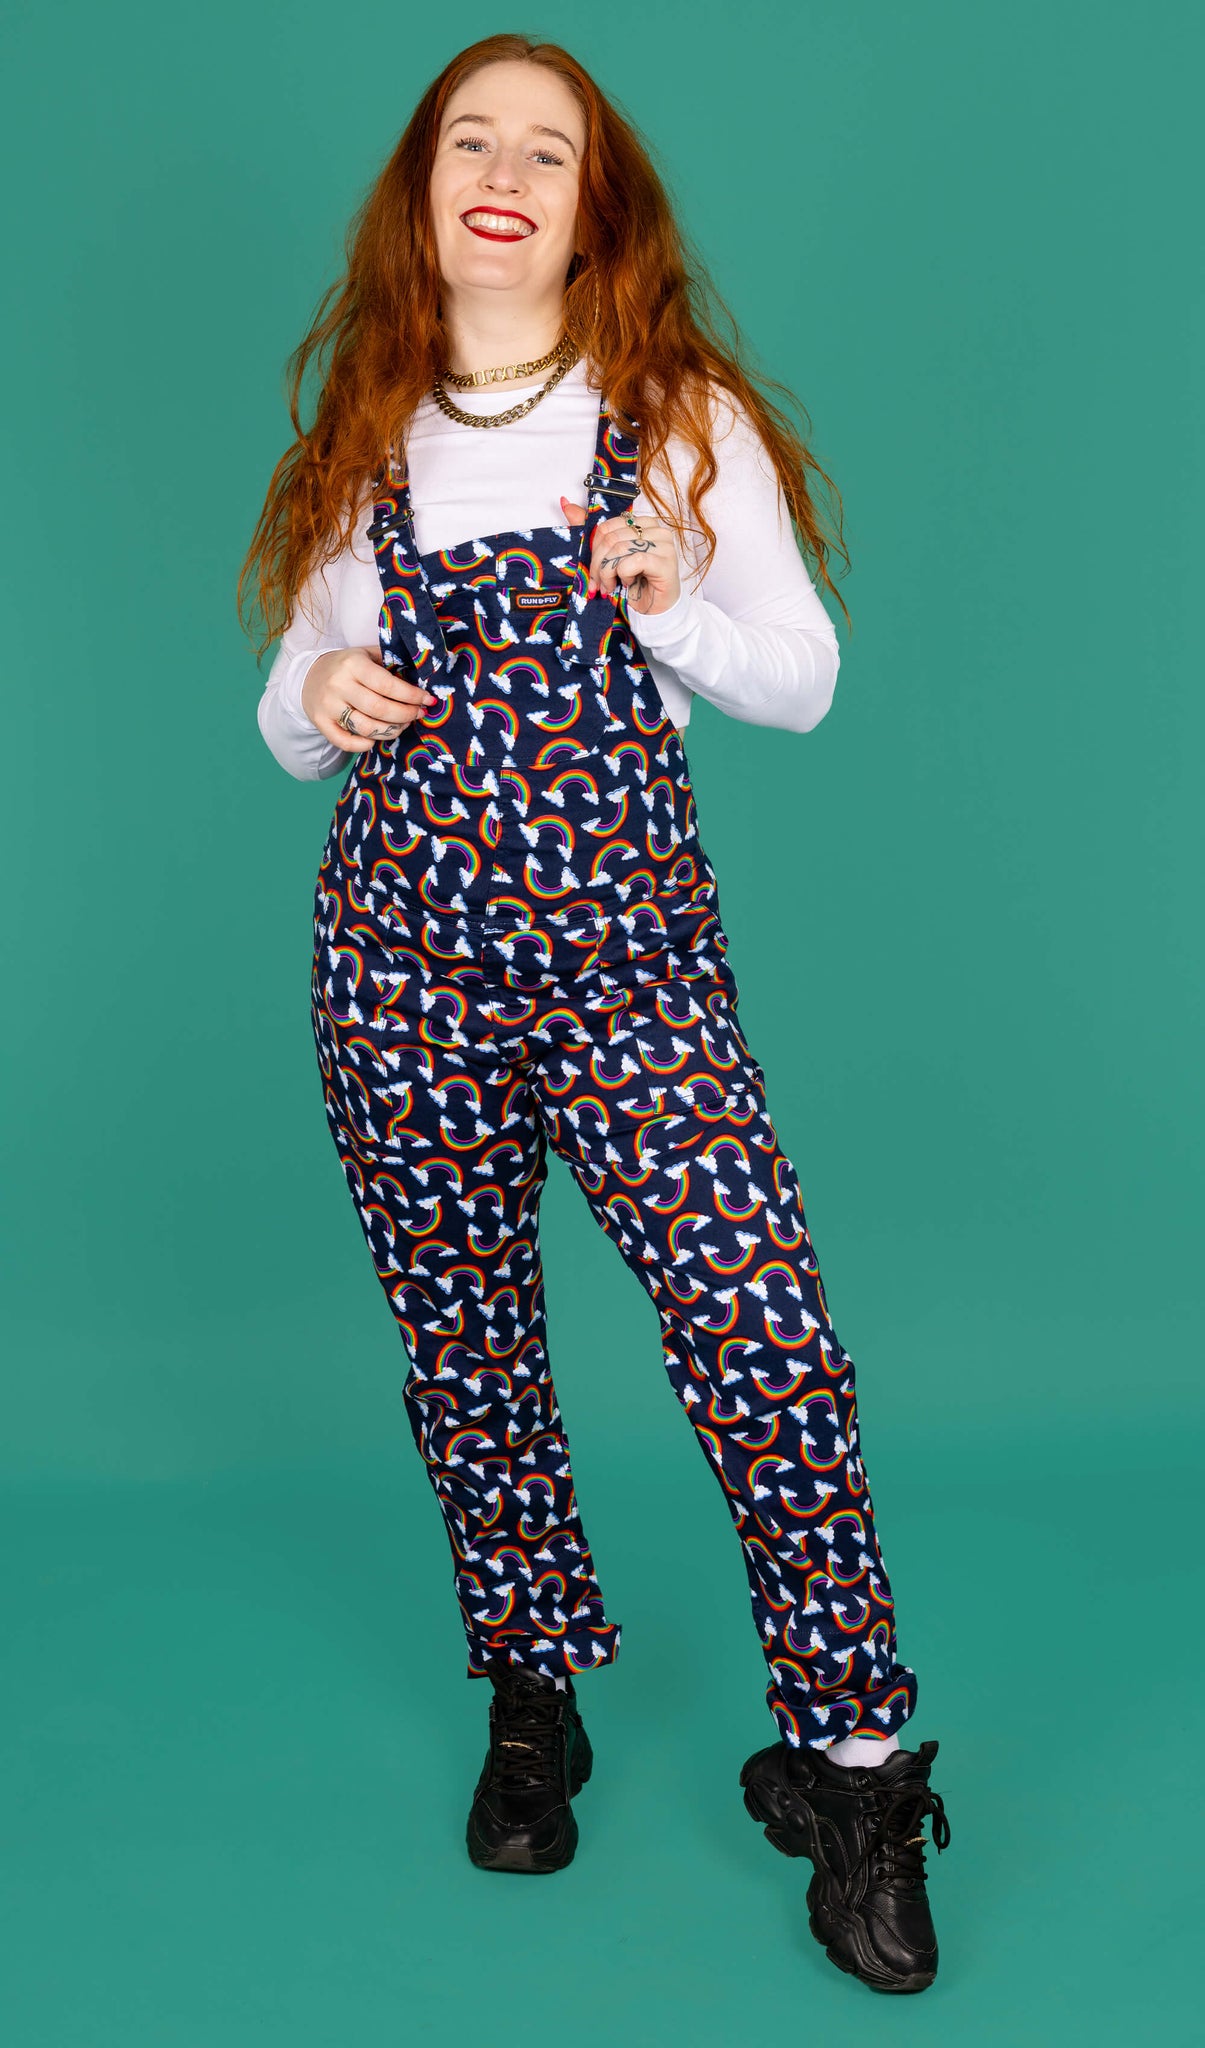 Isobella a white femme model with long ginger hair is wearing navy blue dungarees with all over rainbow and cloud print paired with long sleeve white top and black trainers. Isobella is smiling at the camera with one leg in front of the other and is holding the front of the dungarees in front of a green background.